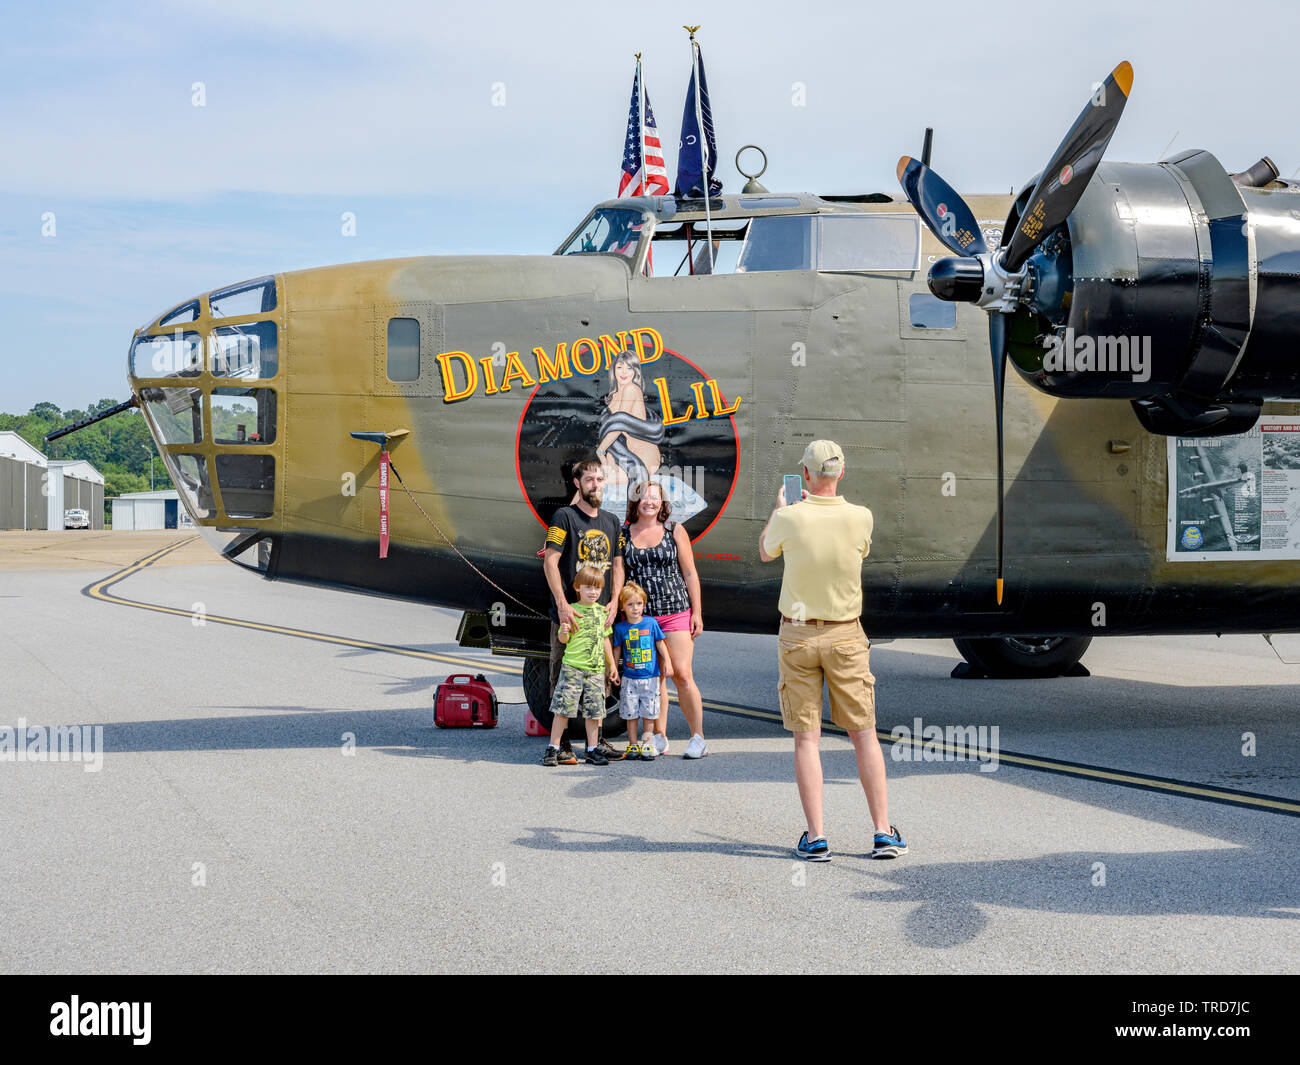 WWII or WW2 B-24 Liberator bomber on display with a family or tourists taking pictures of the American WWII bomber in Montgomery Alabama, USA. Stock Photo